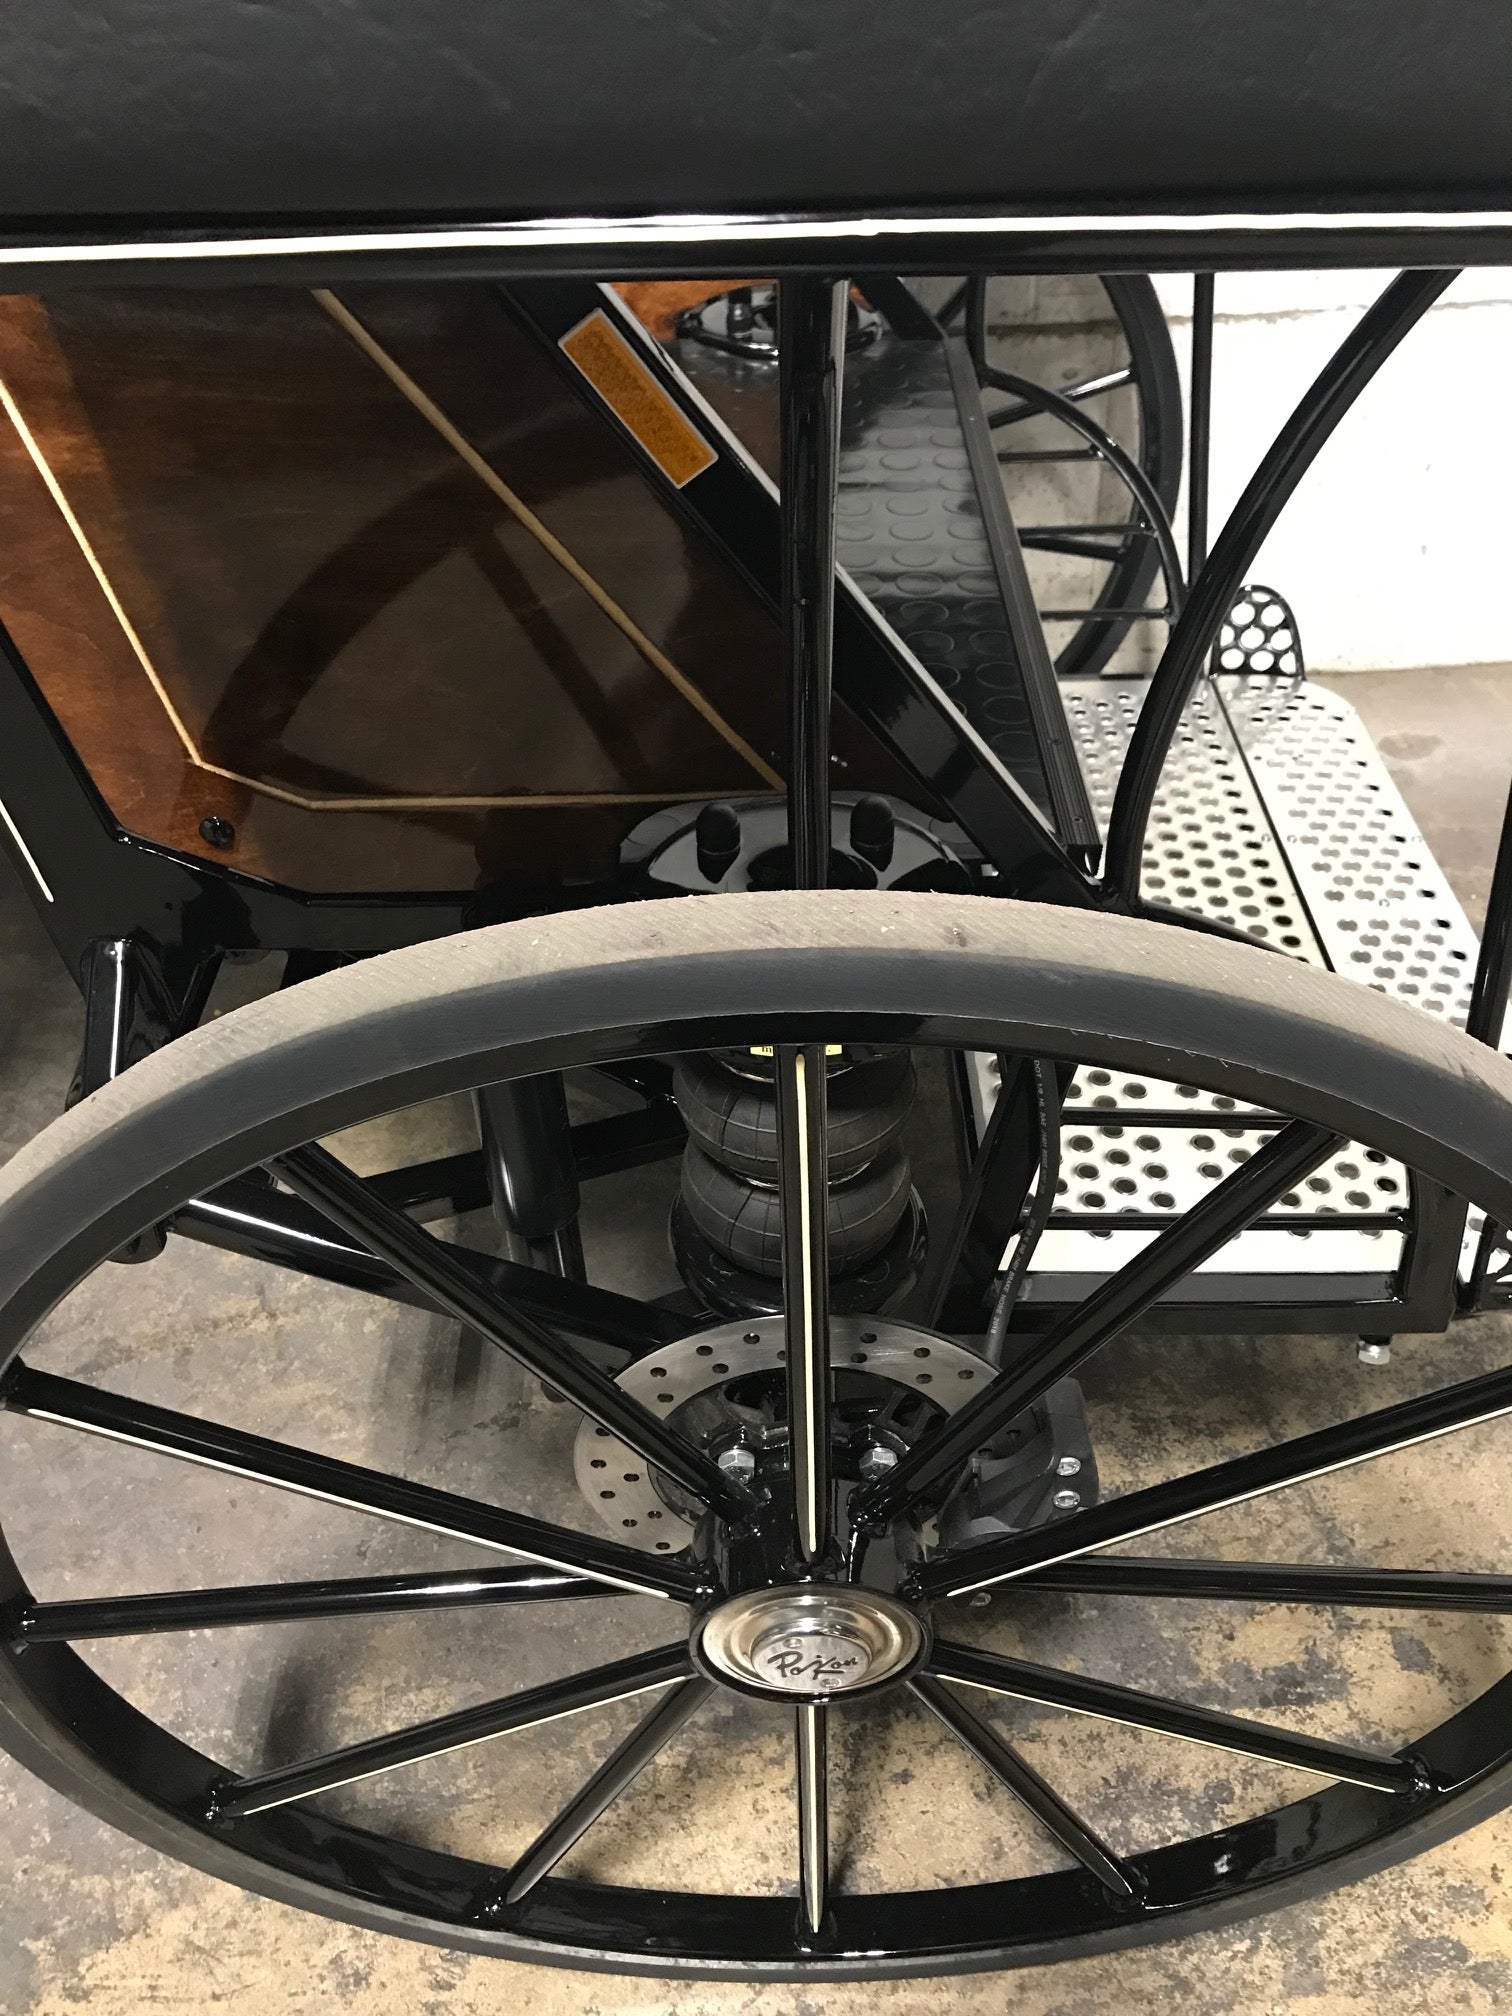 Max I Trainer Carriage | Midwest Custom Carriages